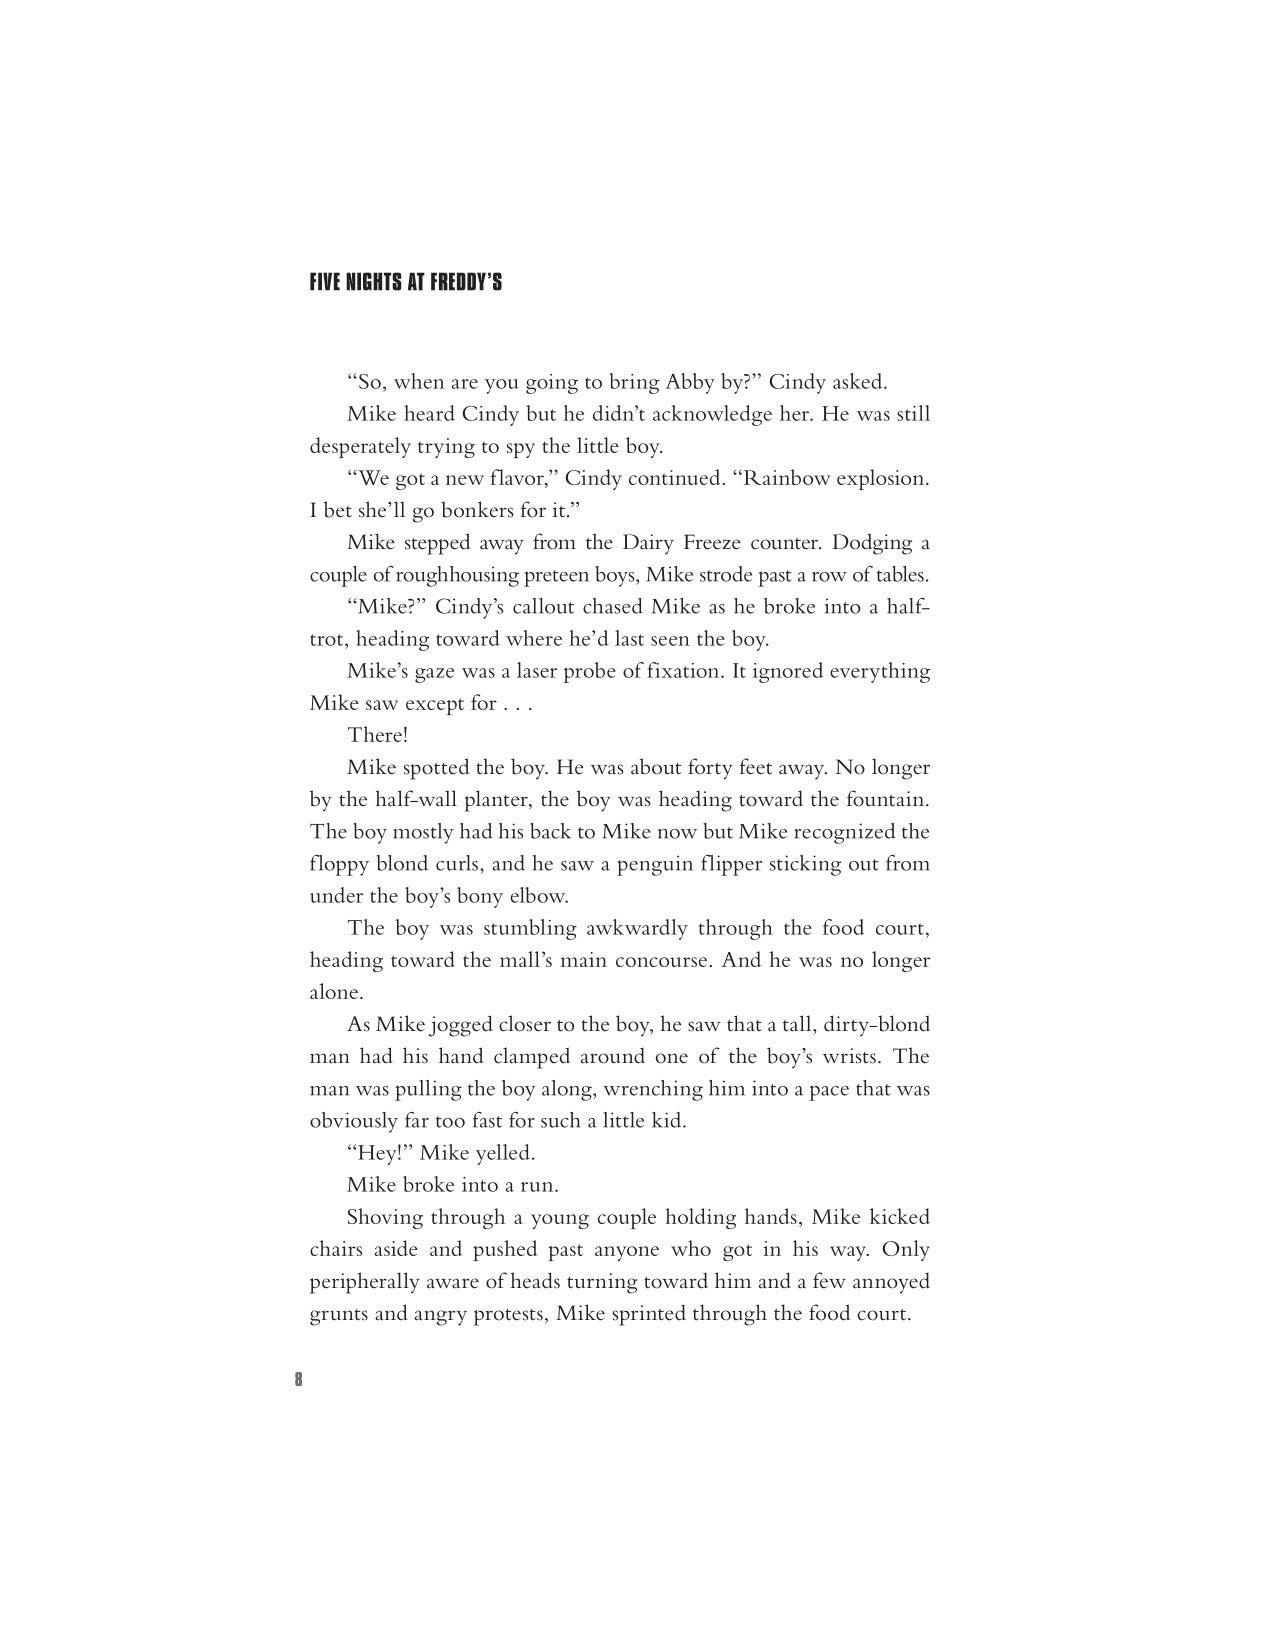 Interior novel page from Five Nights at Freddy's movie novelization